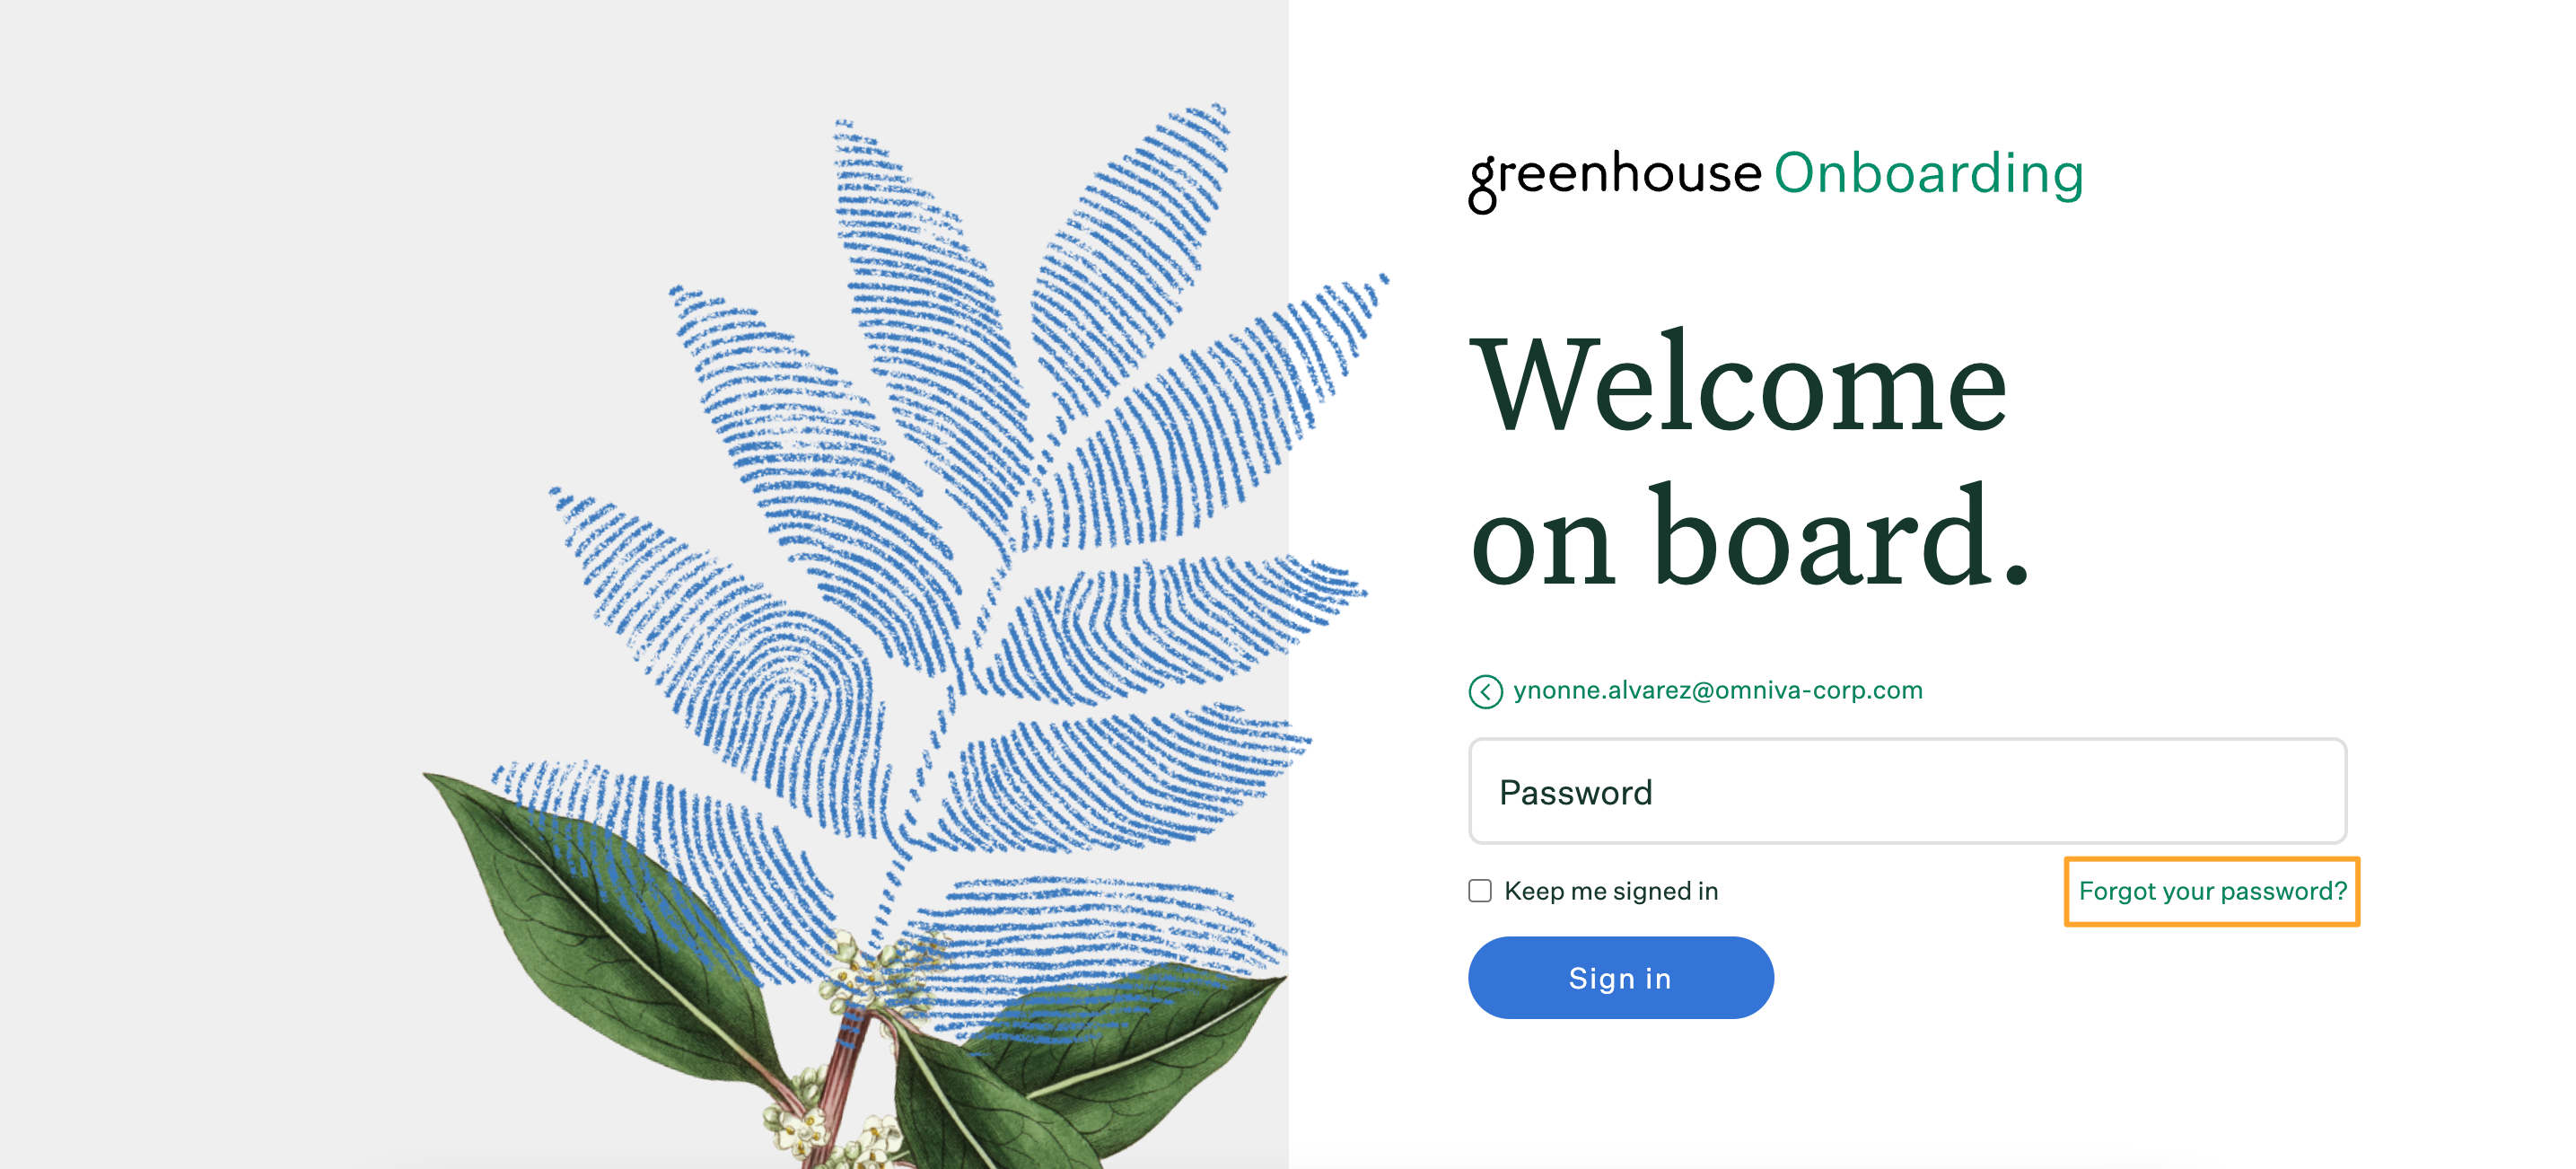 Greenhouse Onboarding login page with forgot your password button highlighted